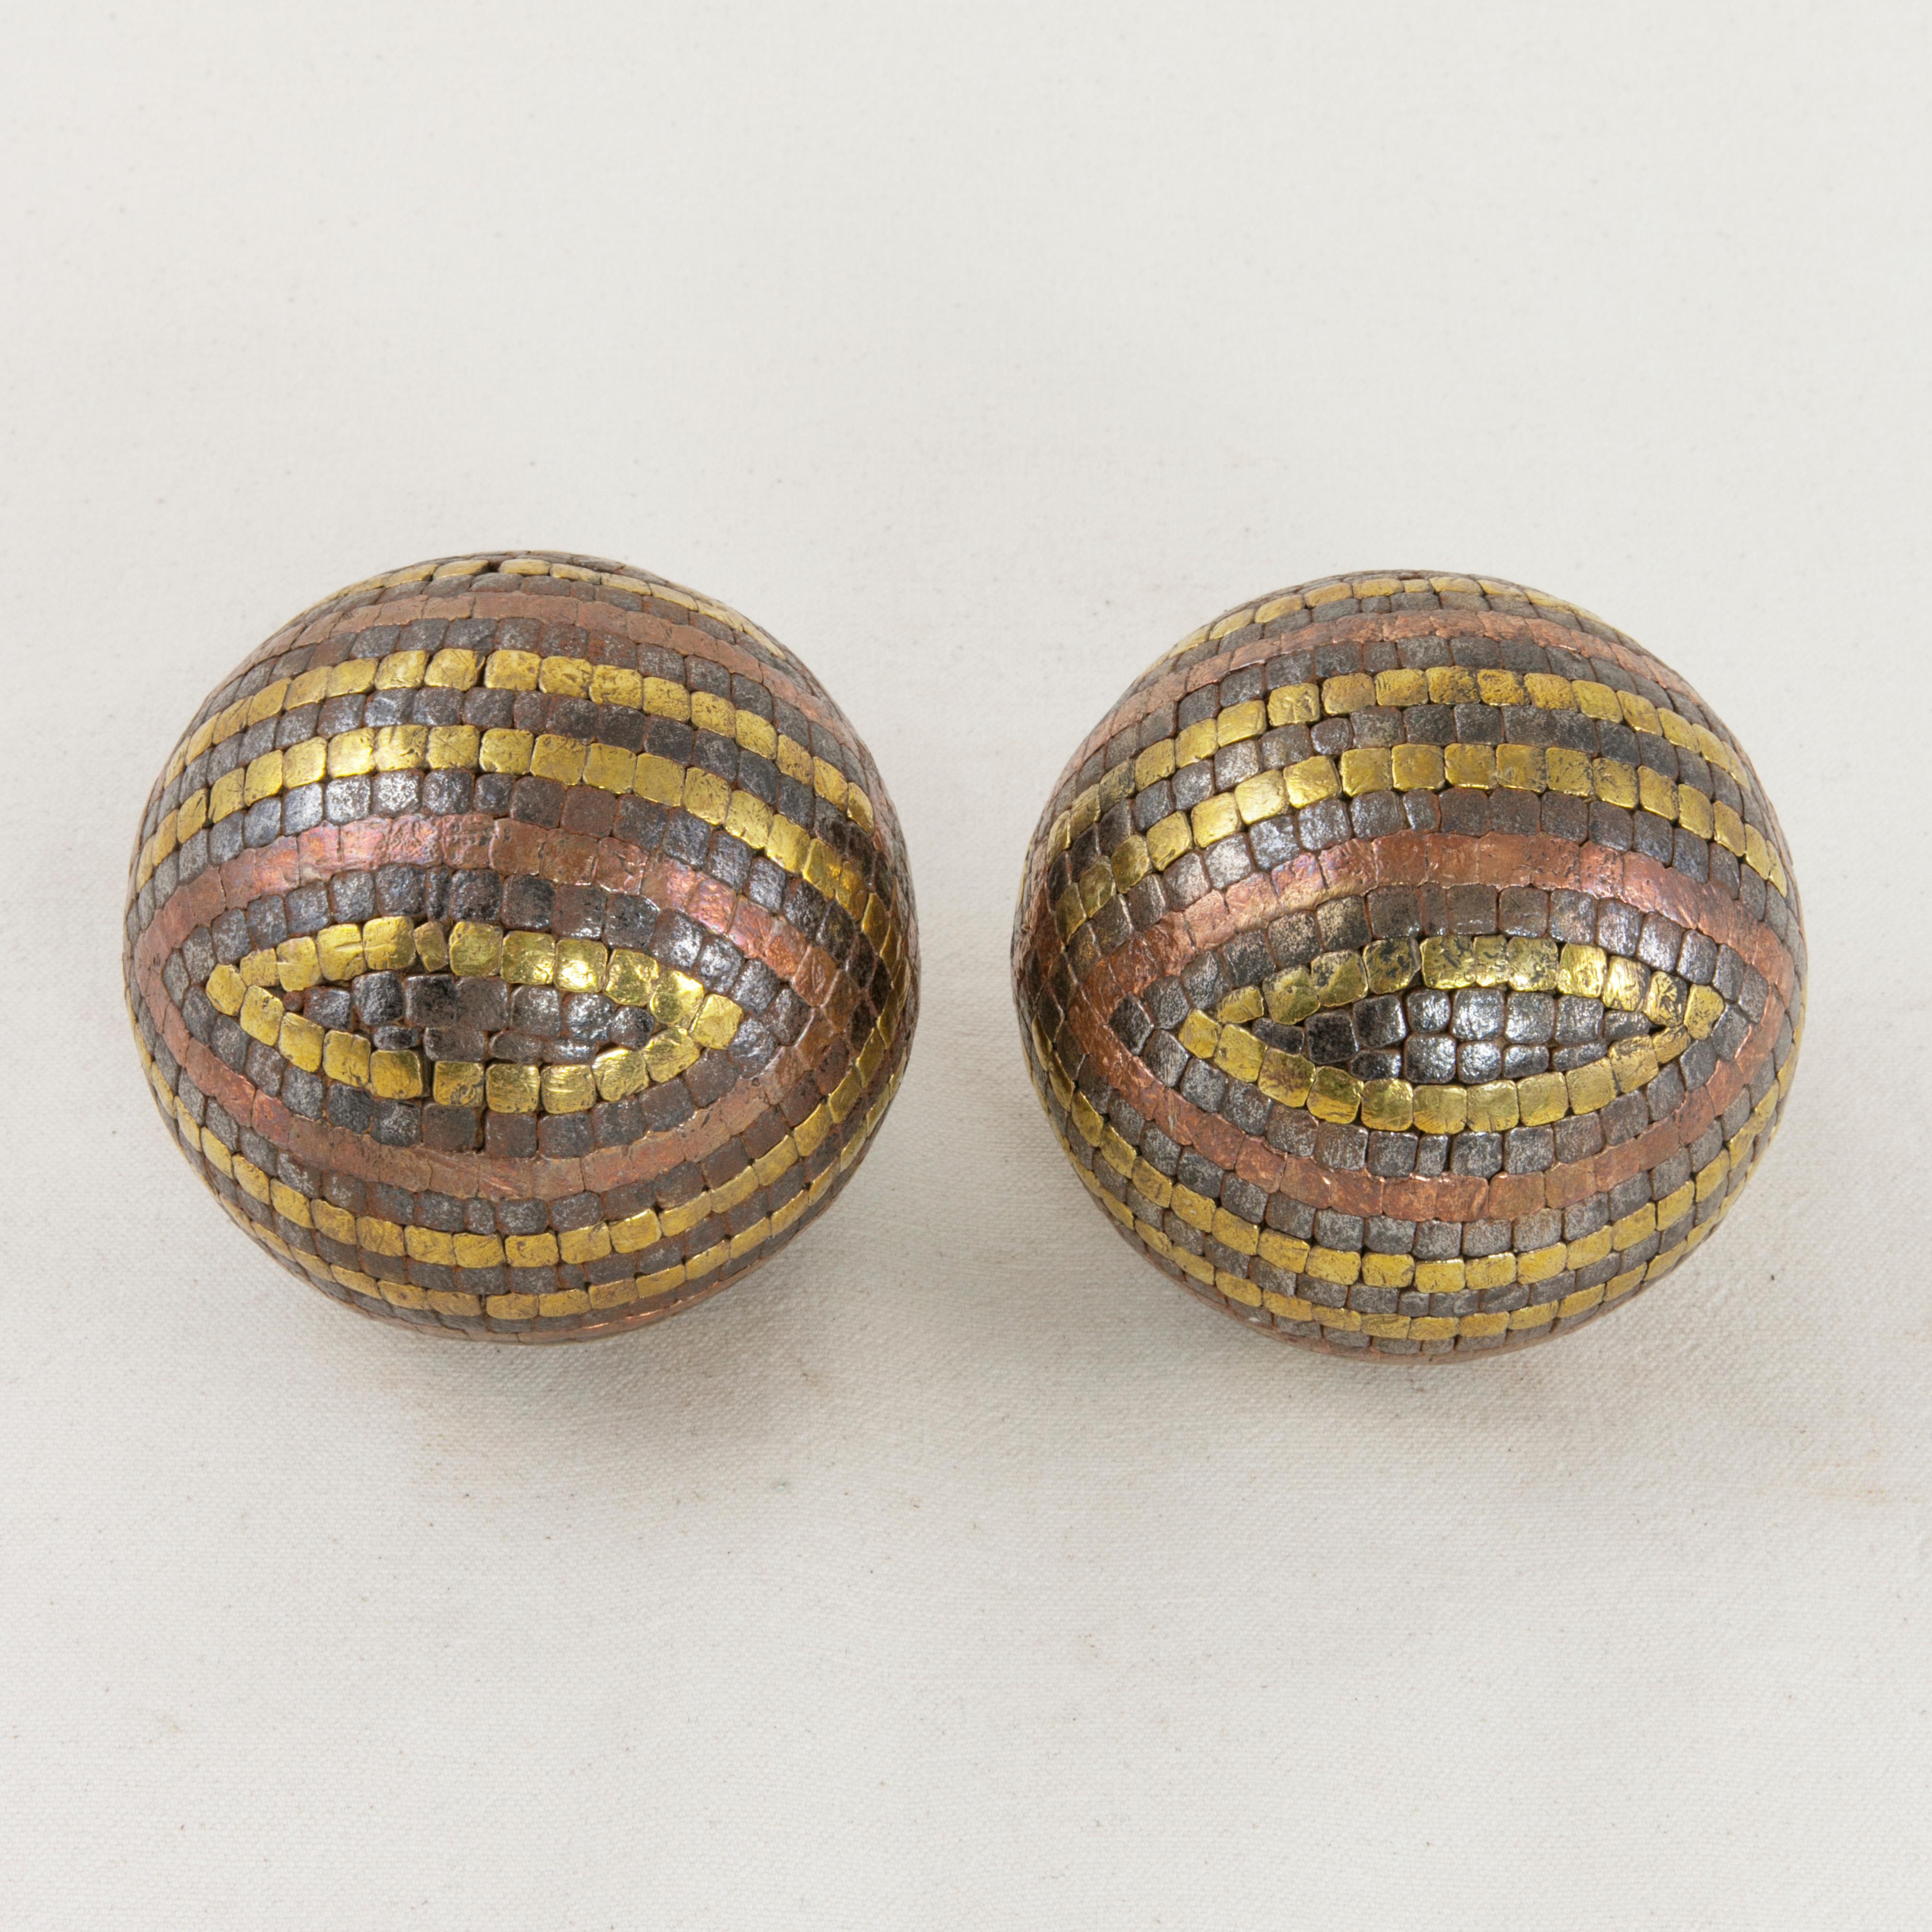 Early 20th Century French Petanque Lawn Balls with Iron, Copper and Brass Nails 2